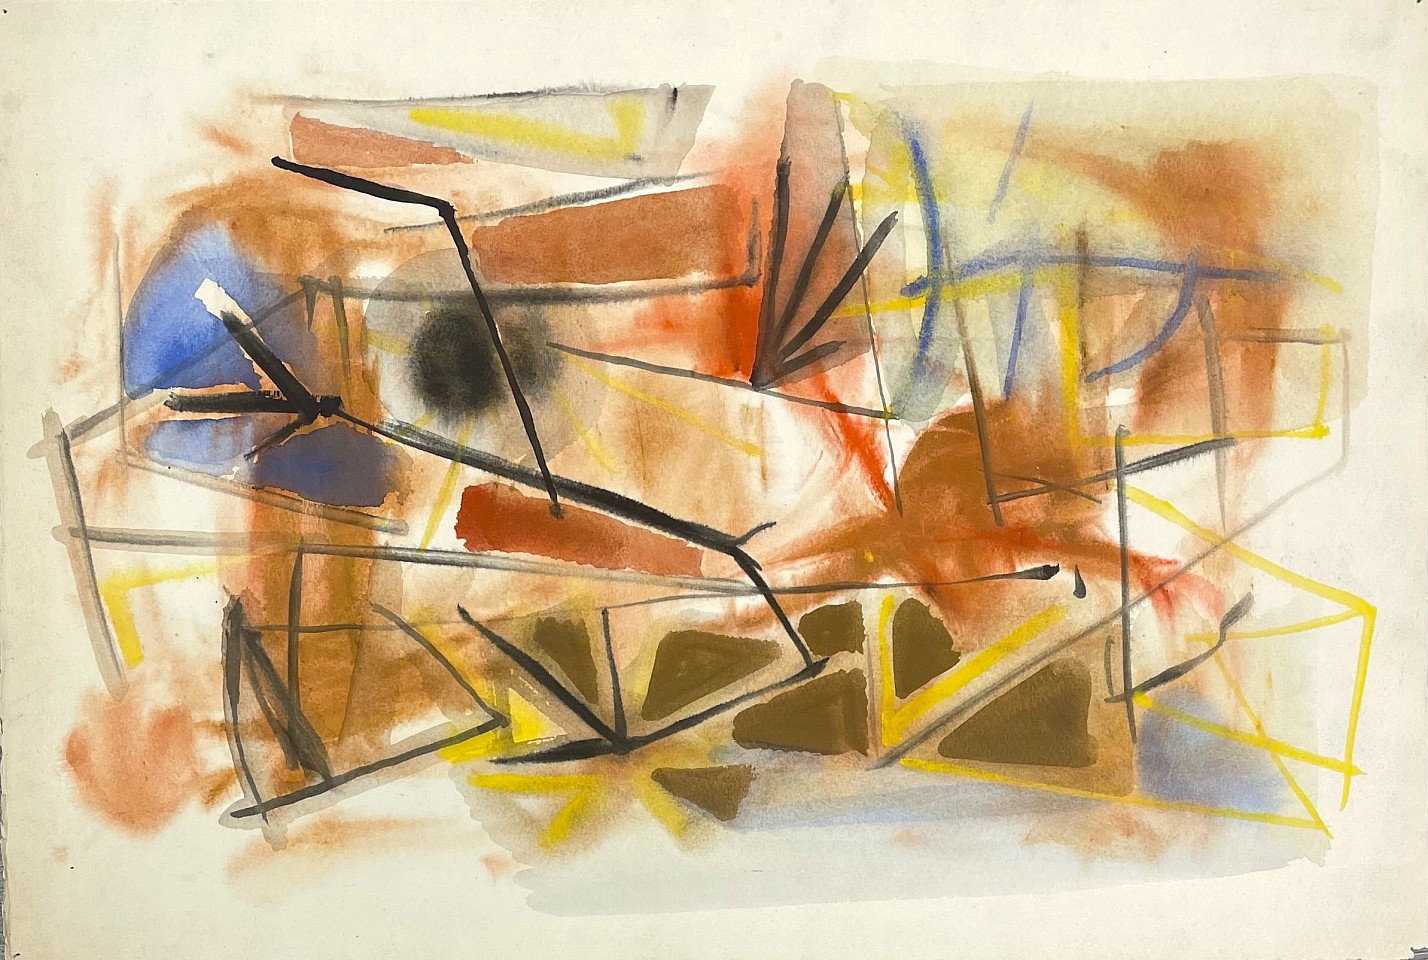 Fred  Mitchell, Untitled, c. 1947
Pastel on paper, 15 1/2 x 22 1/2 in.
MIT008